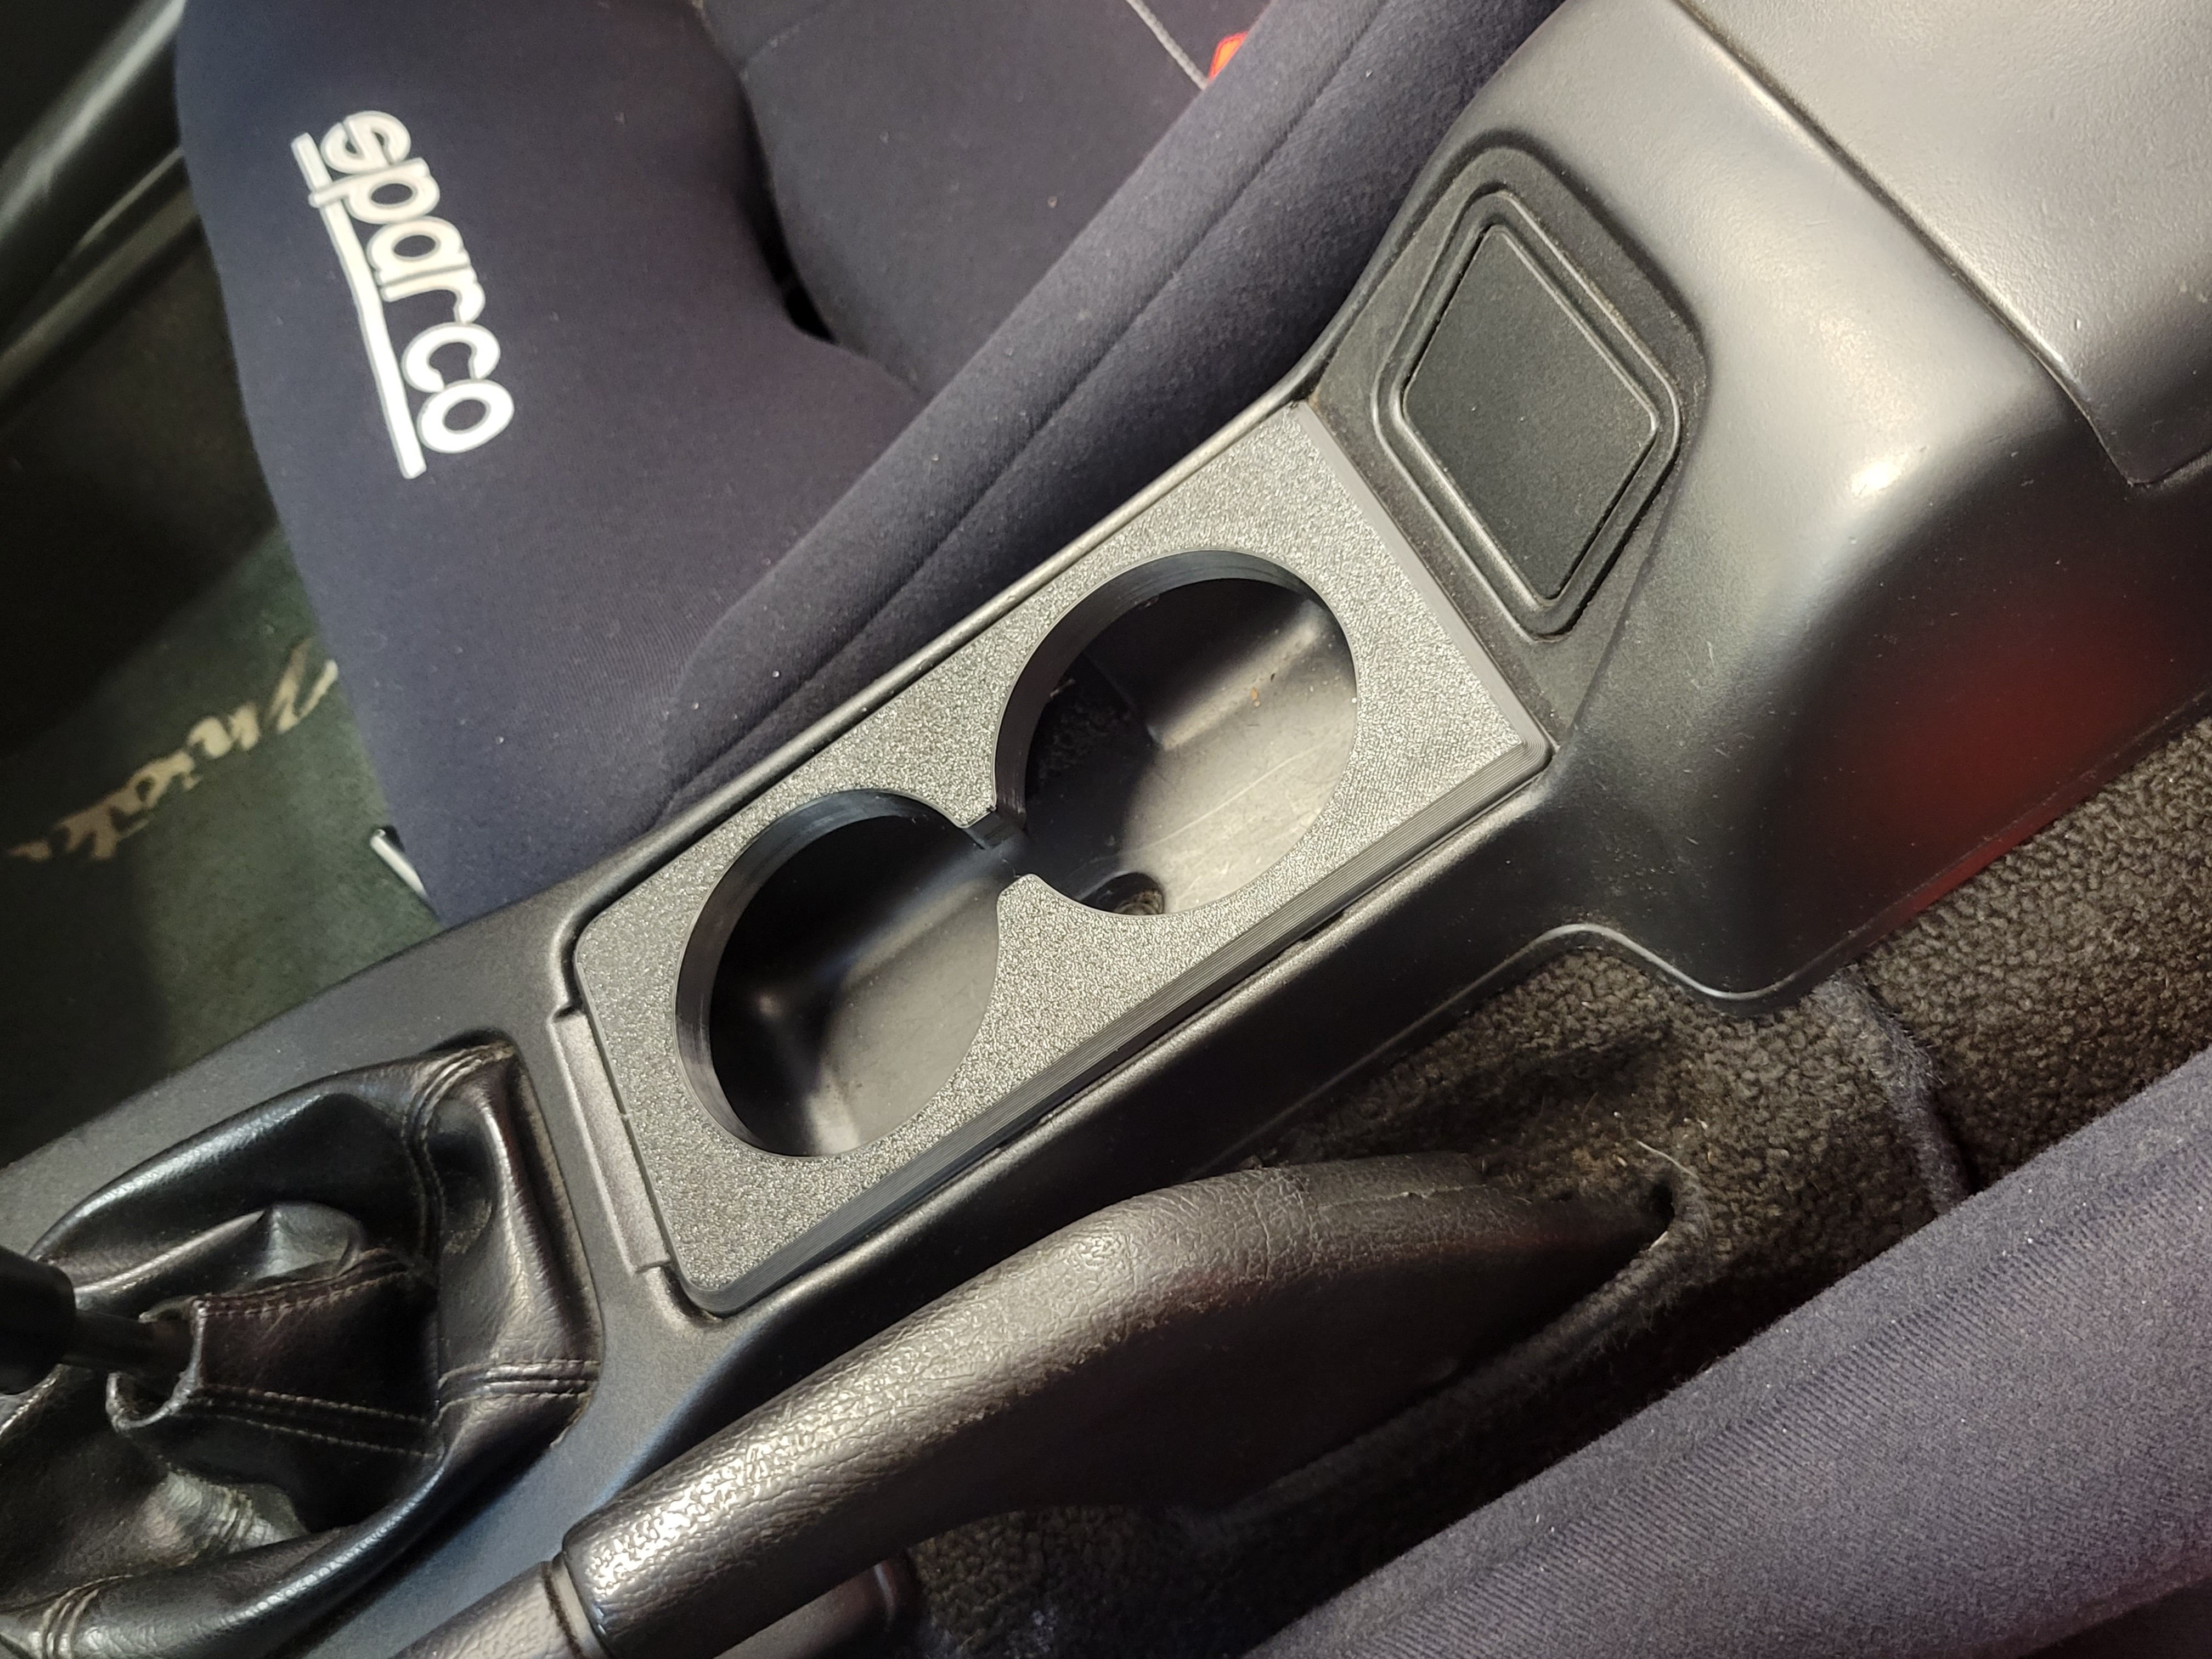 Bmw E46 Cup Holder 